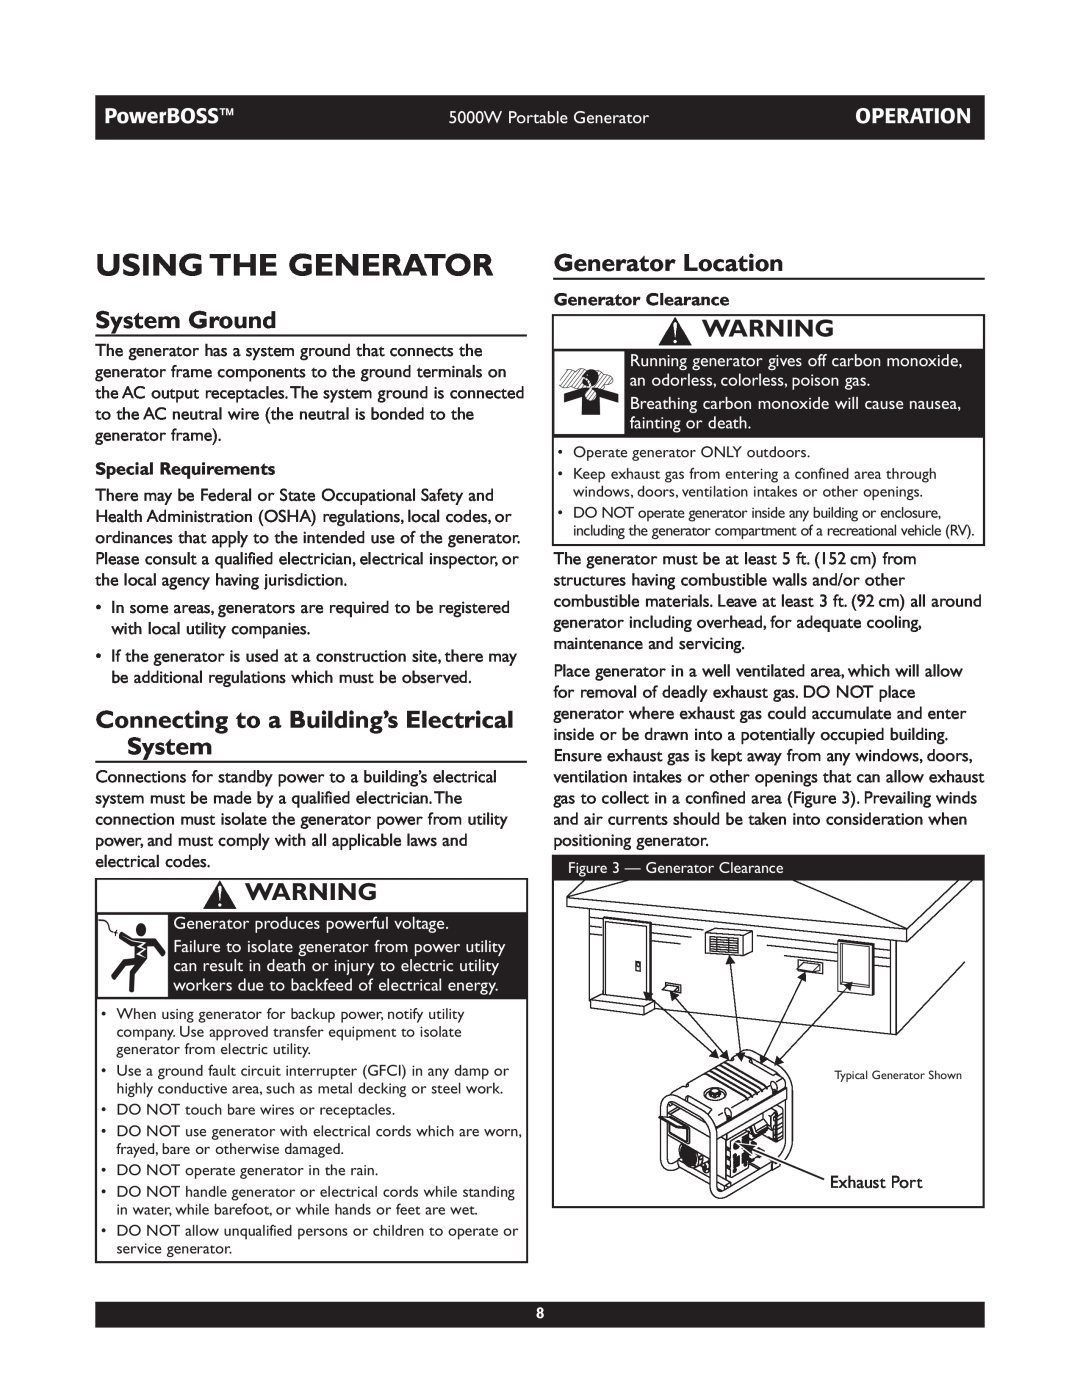 Briggs & Stratton 030222 Using The Generator, System Ground, Connecting to a Building’s Electrical System, Operation 